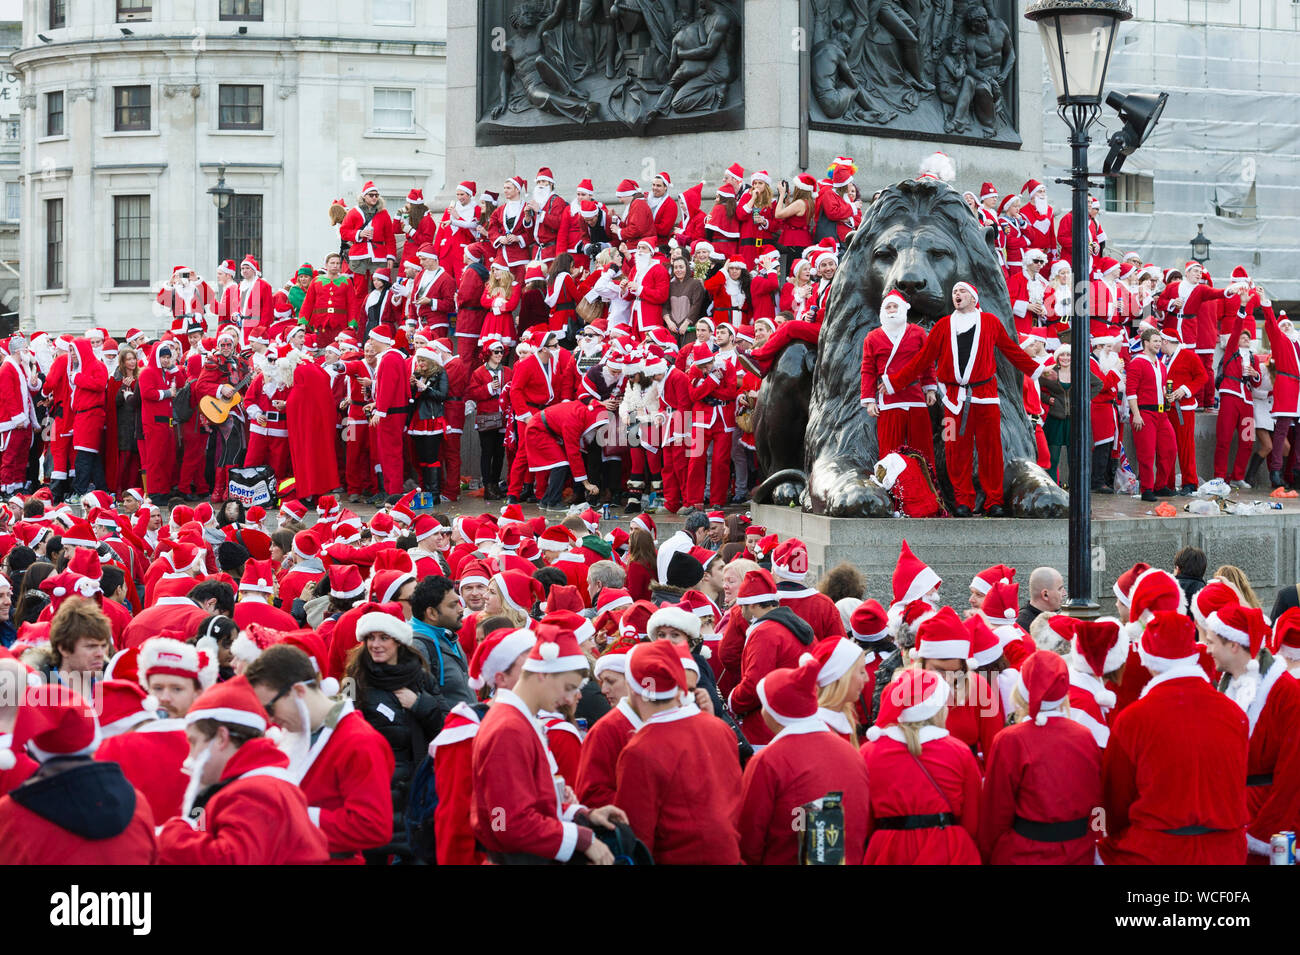 Hundreds of Santas flood Trafalgar Square for the annual, global phenomenon of Santacon. There was carolling and sprout throwing, many takes on the tr Stock Photo